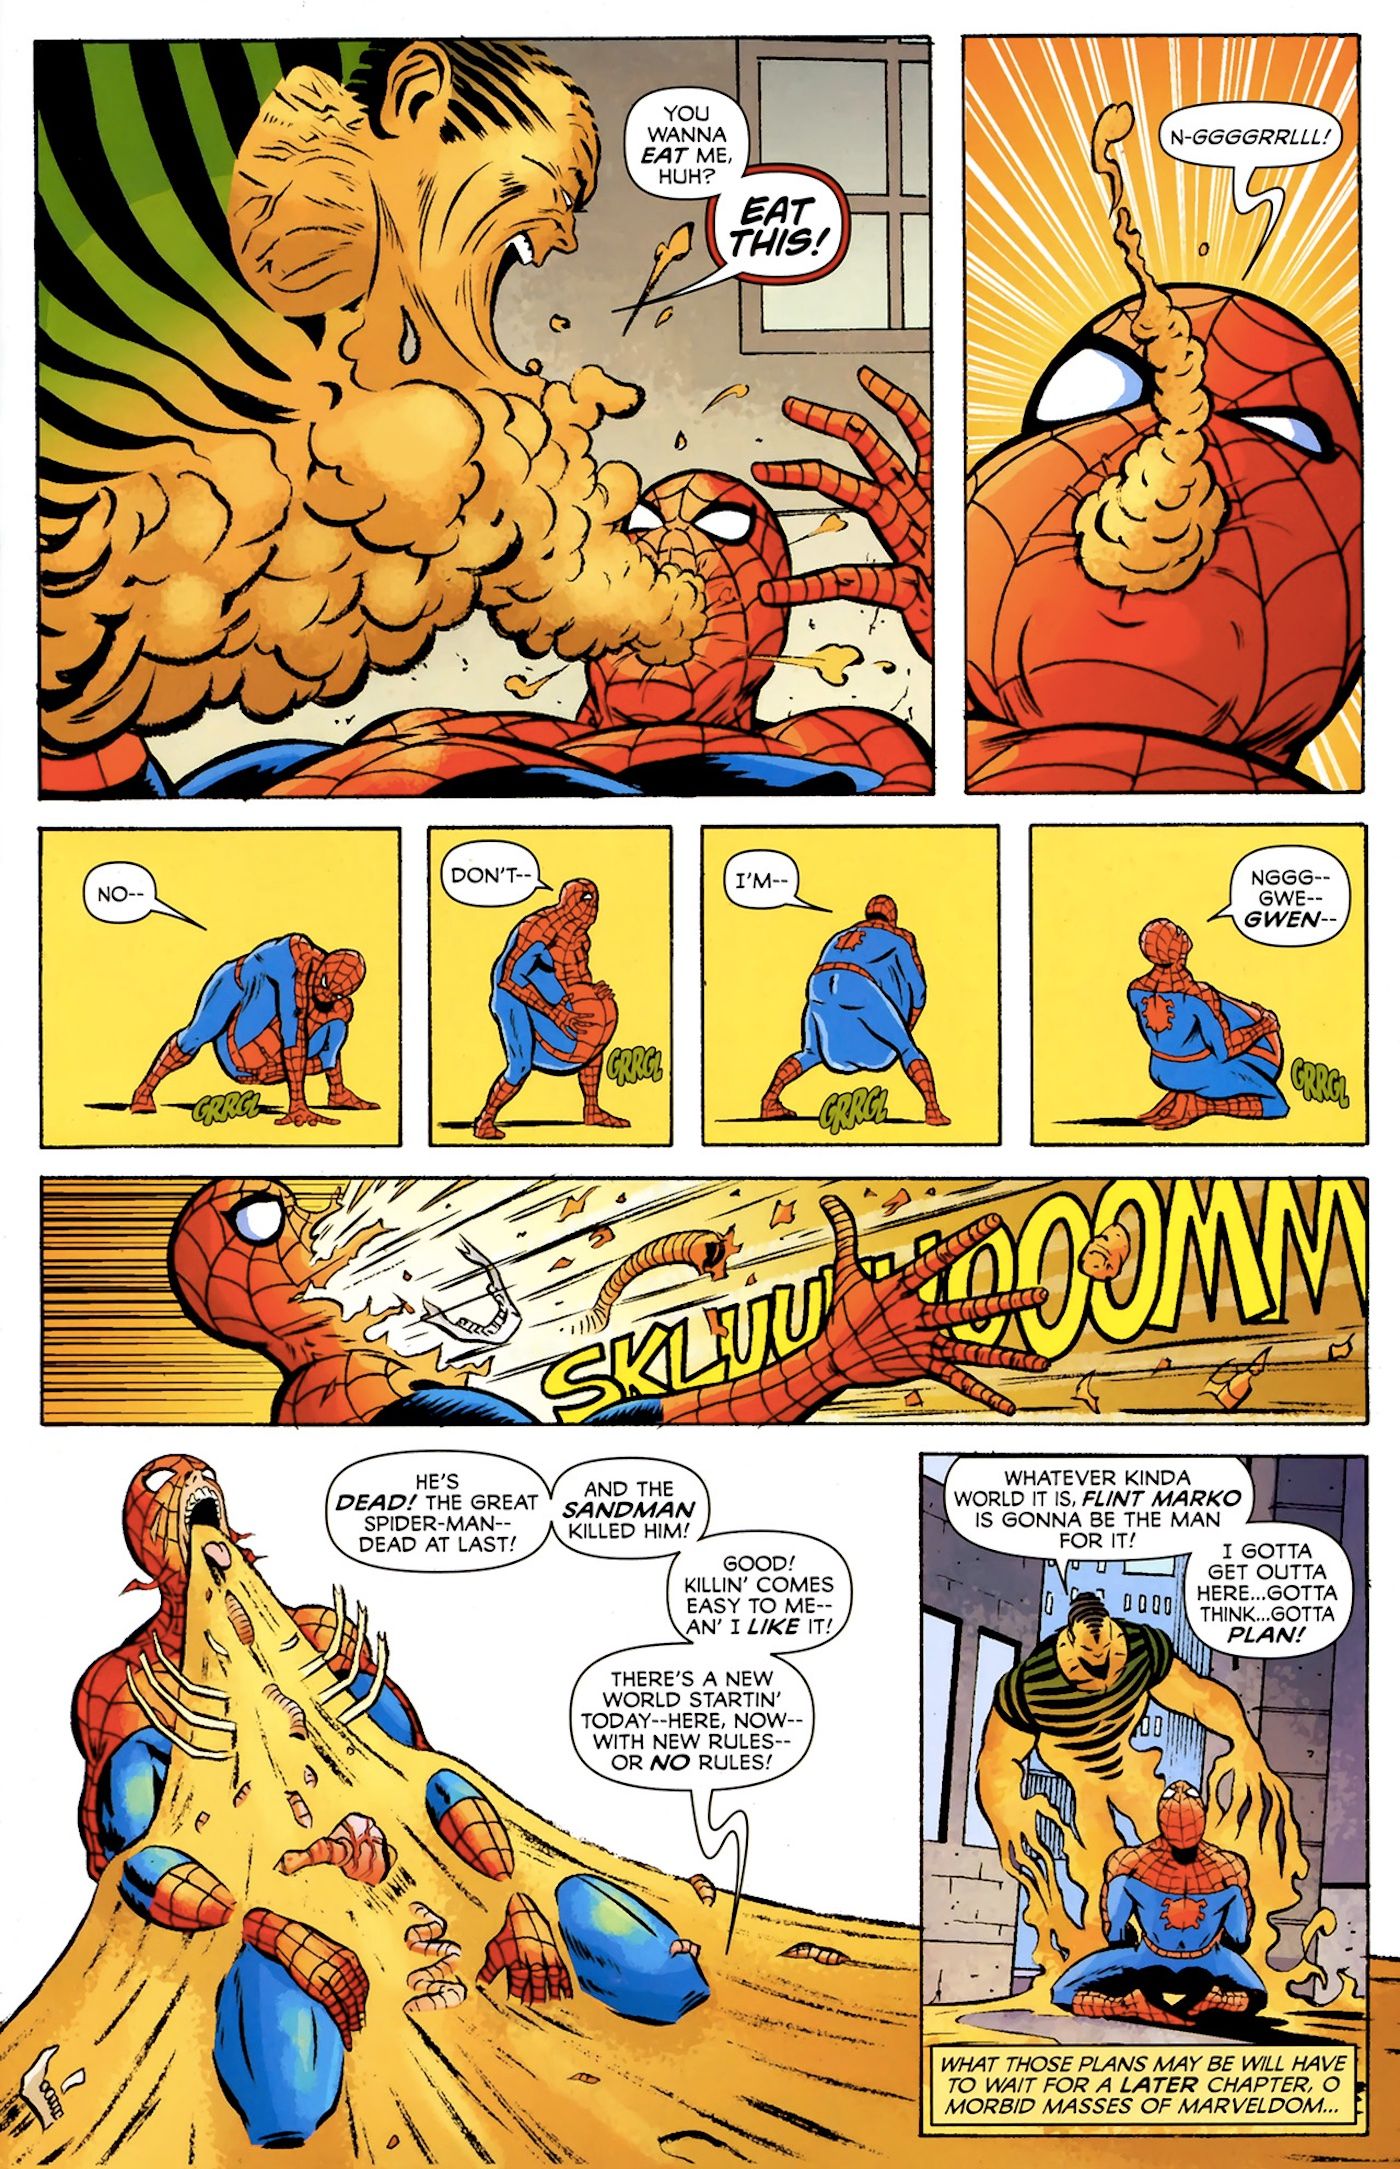 Sandman Kills Spider-Man from the Inside Out